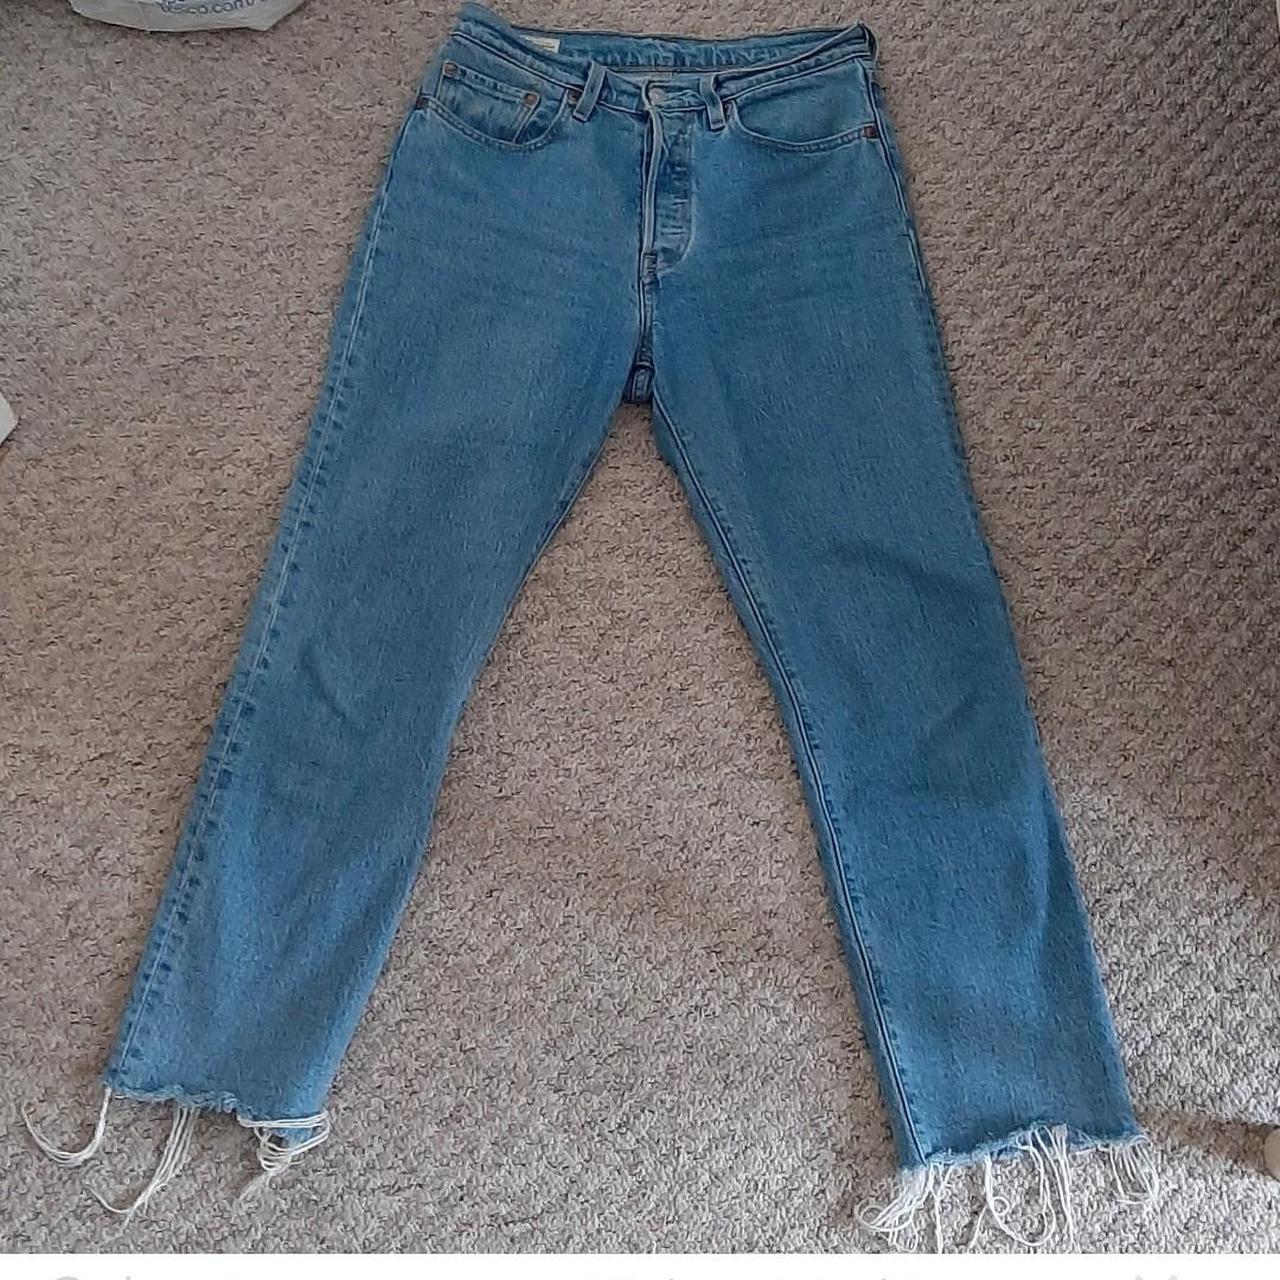 Barely worn pair of high waisted Levi jeans in great... - Depop